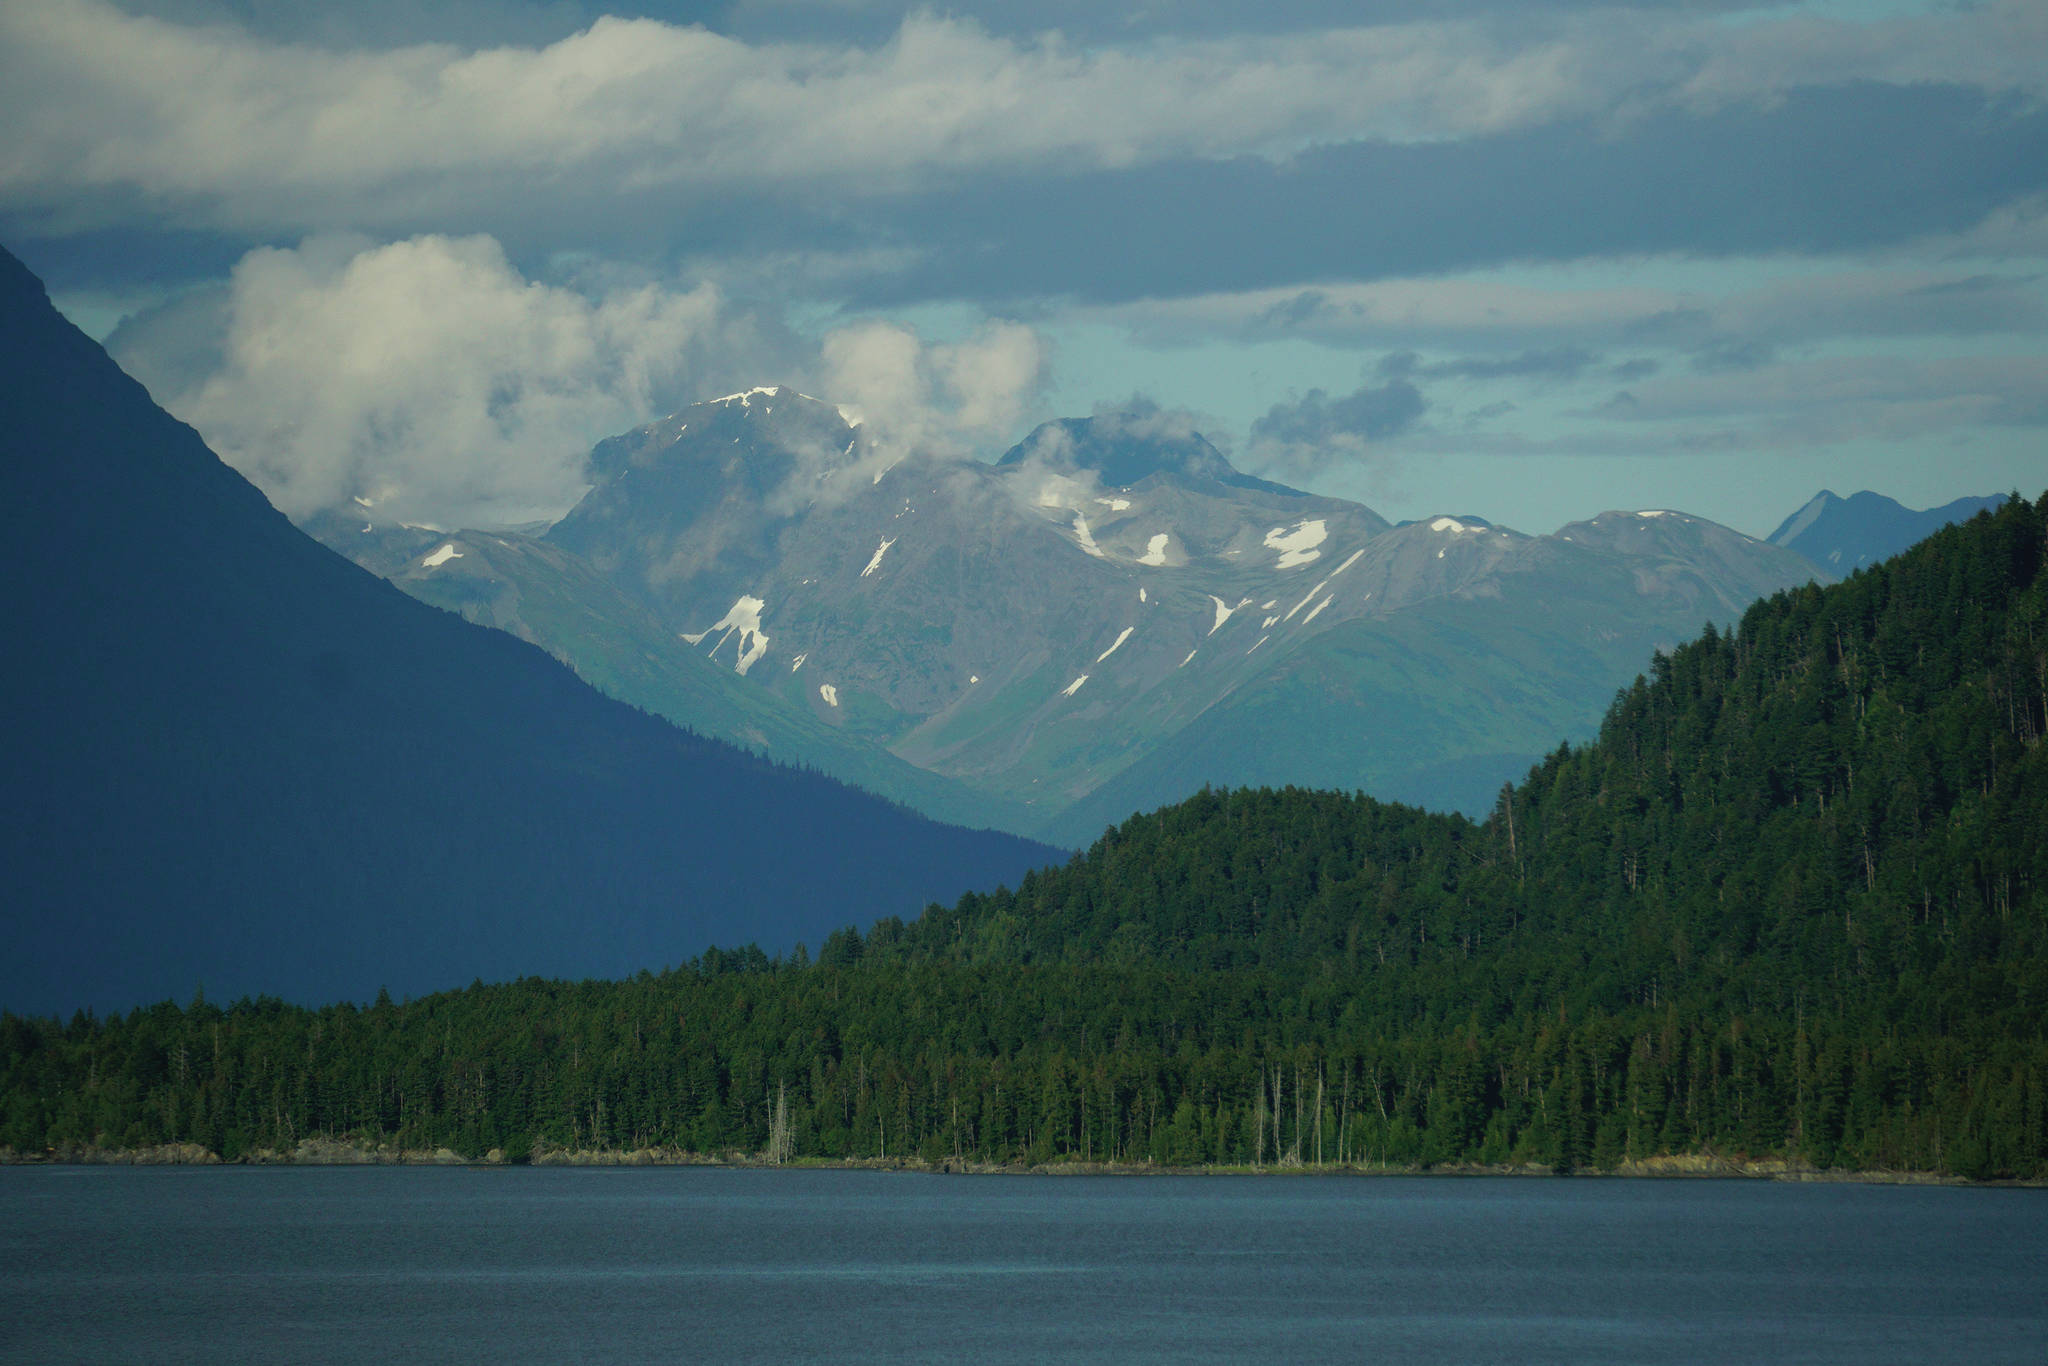 The U.S. Forest Service Porcupine Campground offers gorgeous views of the Kenai Mountains and Turnagain Arm, as seen here on July 20, 2020, near Hope, Alaska. (Photo by Michael Armstrong/Homer News)